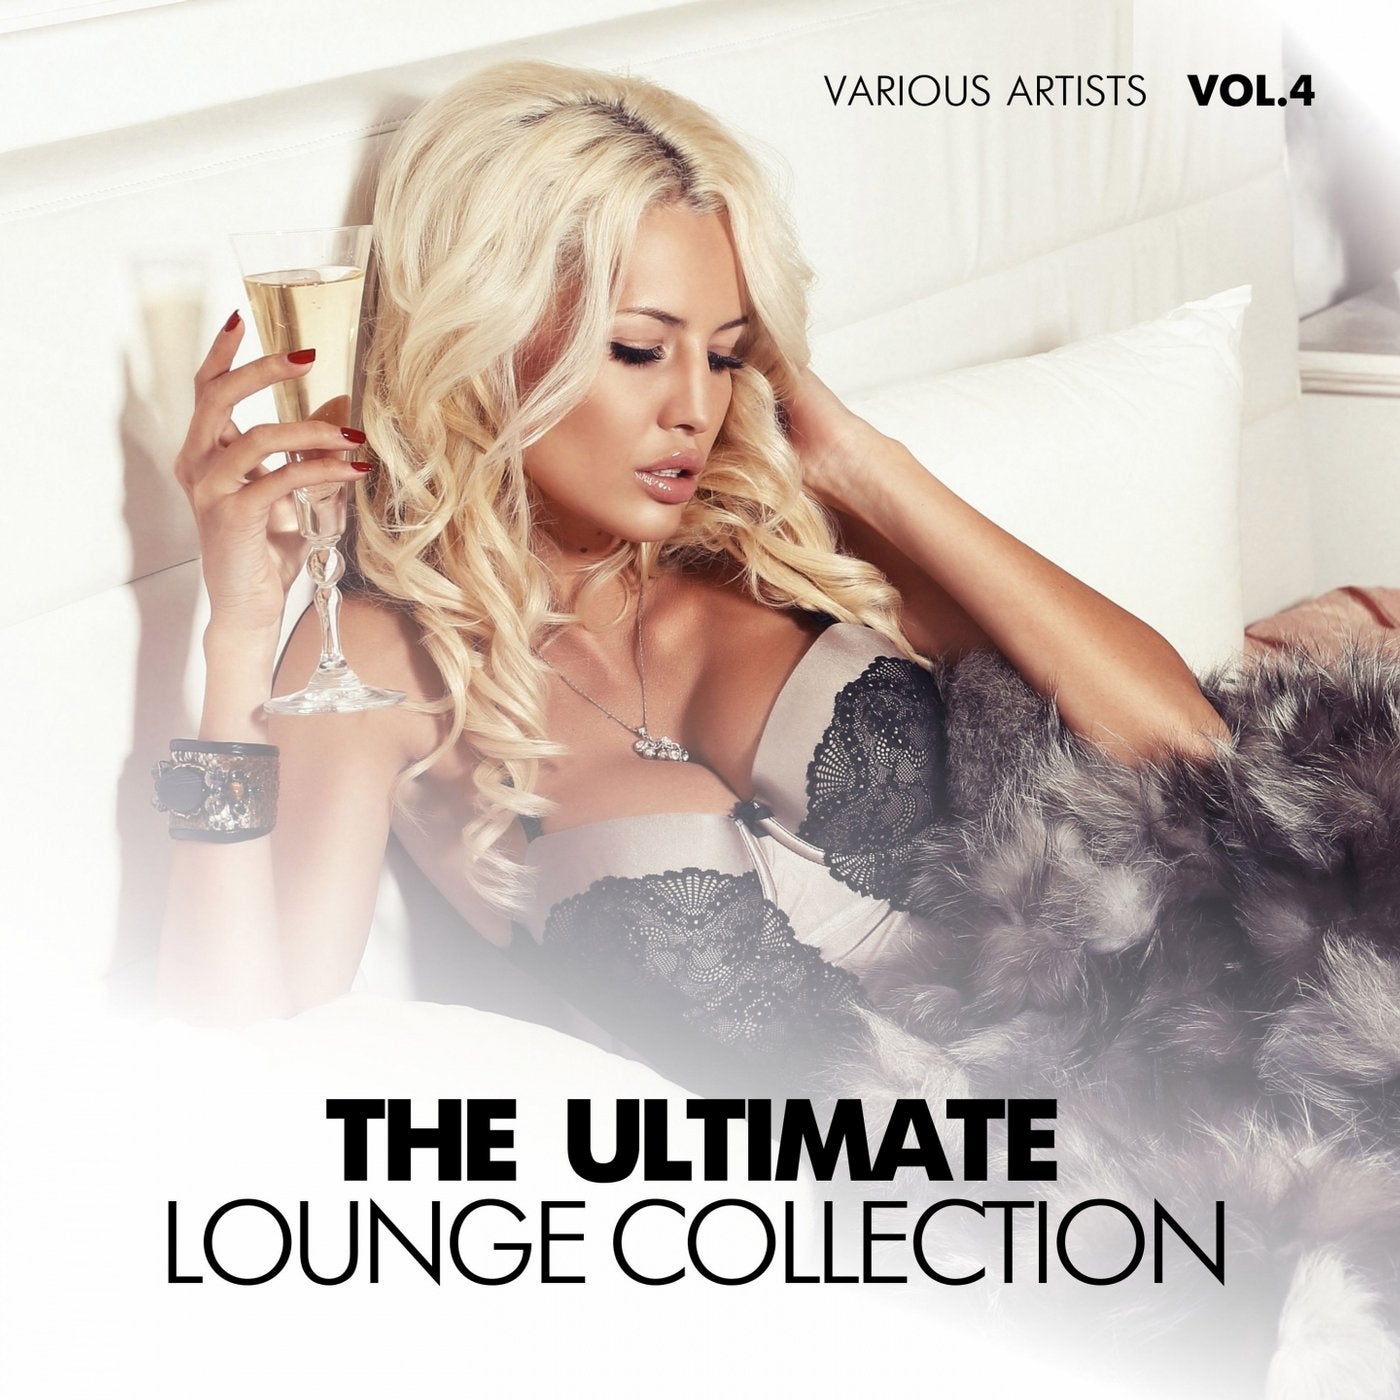 The Ultimate Lounge Collection, Vol. 4